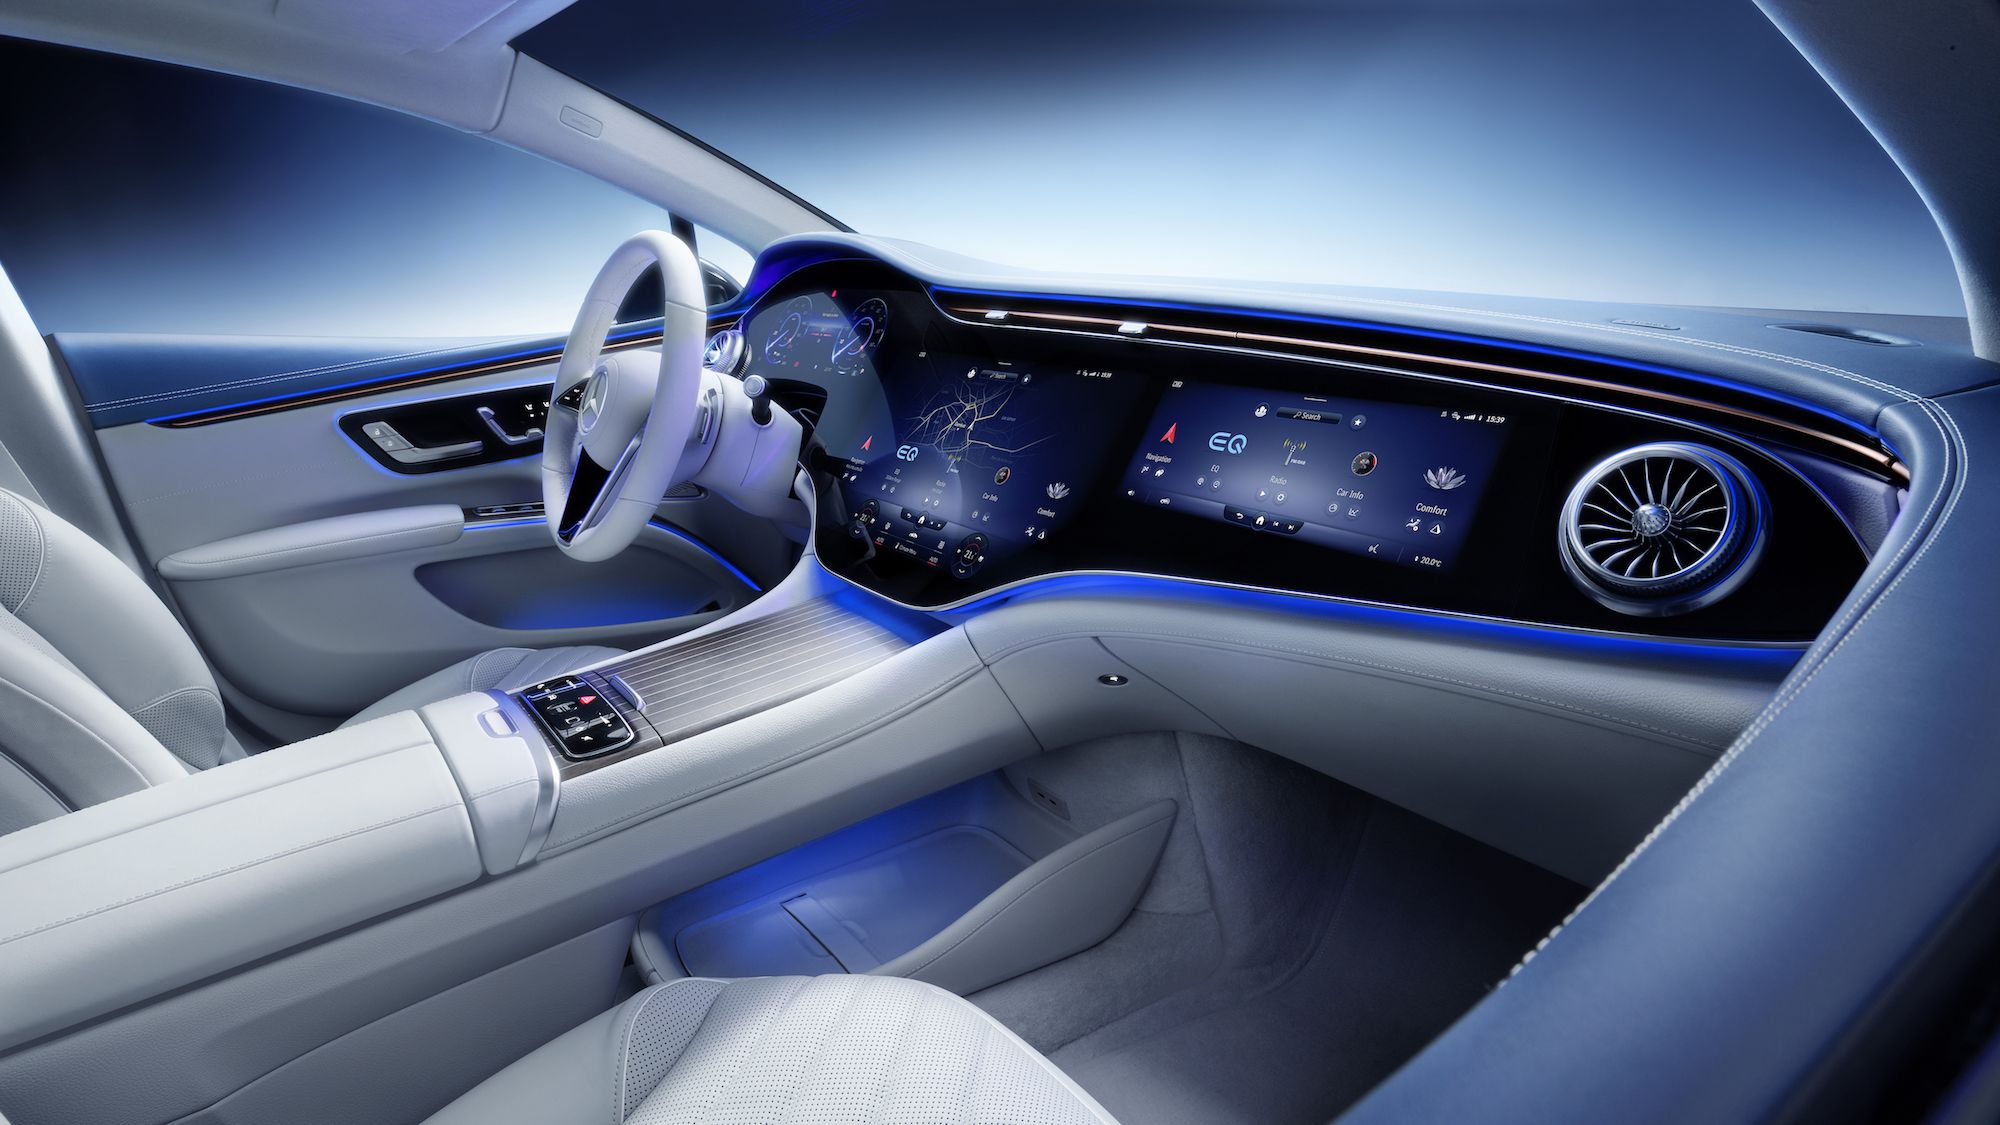 5 Interesting In-Car Infotainment Systems to Watch (and Relearn)